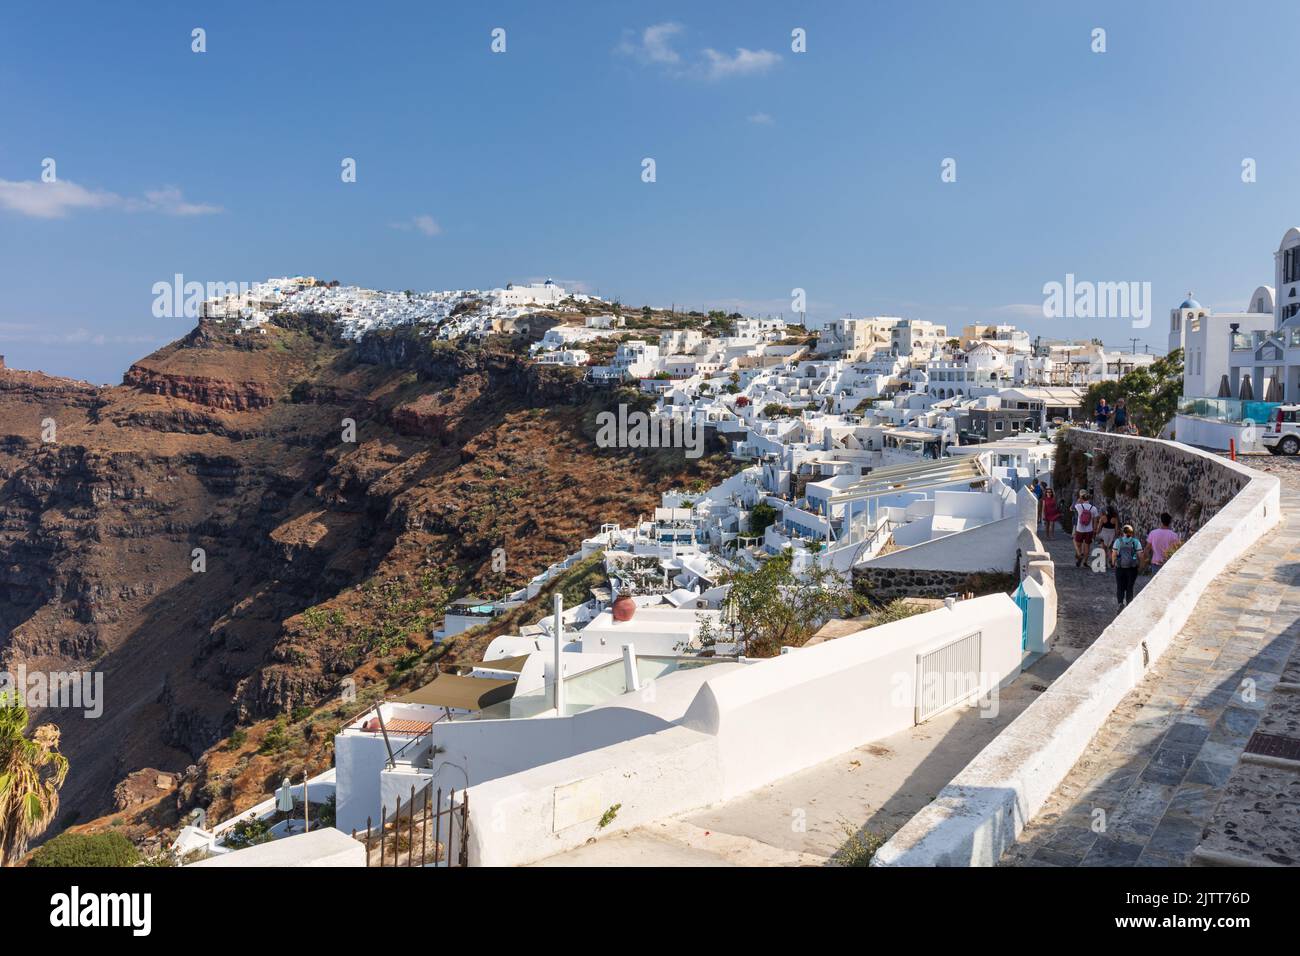 View of whitewashed buildings in Firostefani and Imerovigil in the background. Santorini, Cyclades islands, Greece, Europe Stock Photo